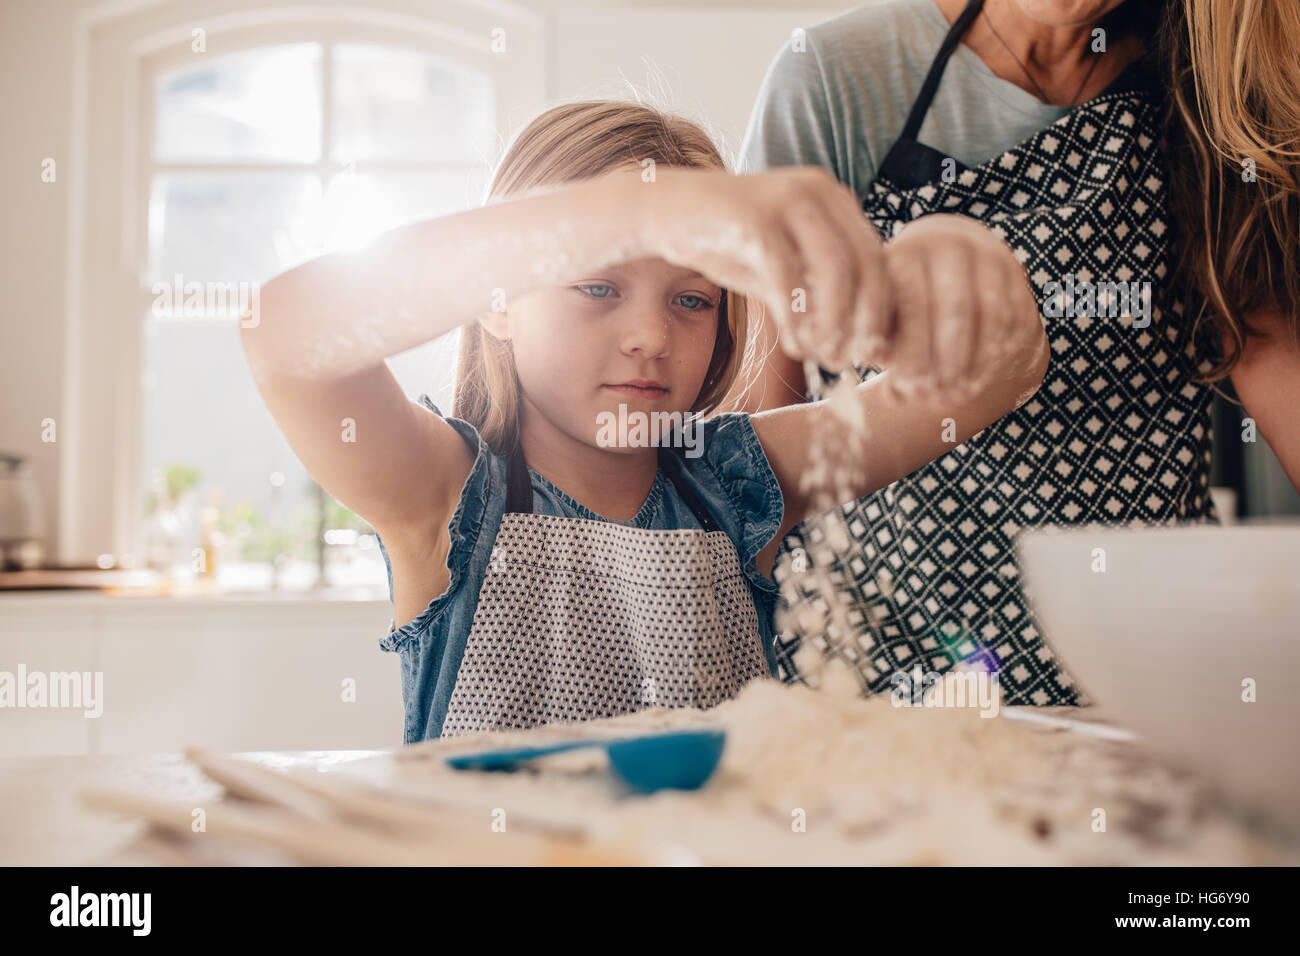 Beautiful little girl learns to cook a meal in the kitchen. Girl making a dough for baking with her mother standing by. Stock Photo